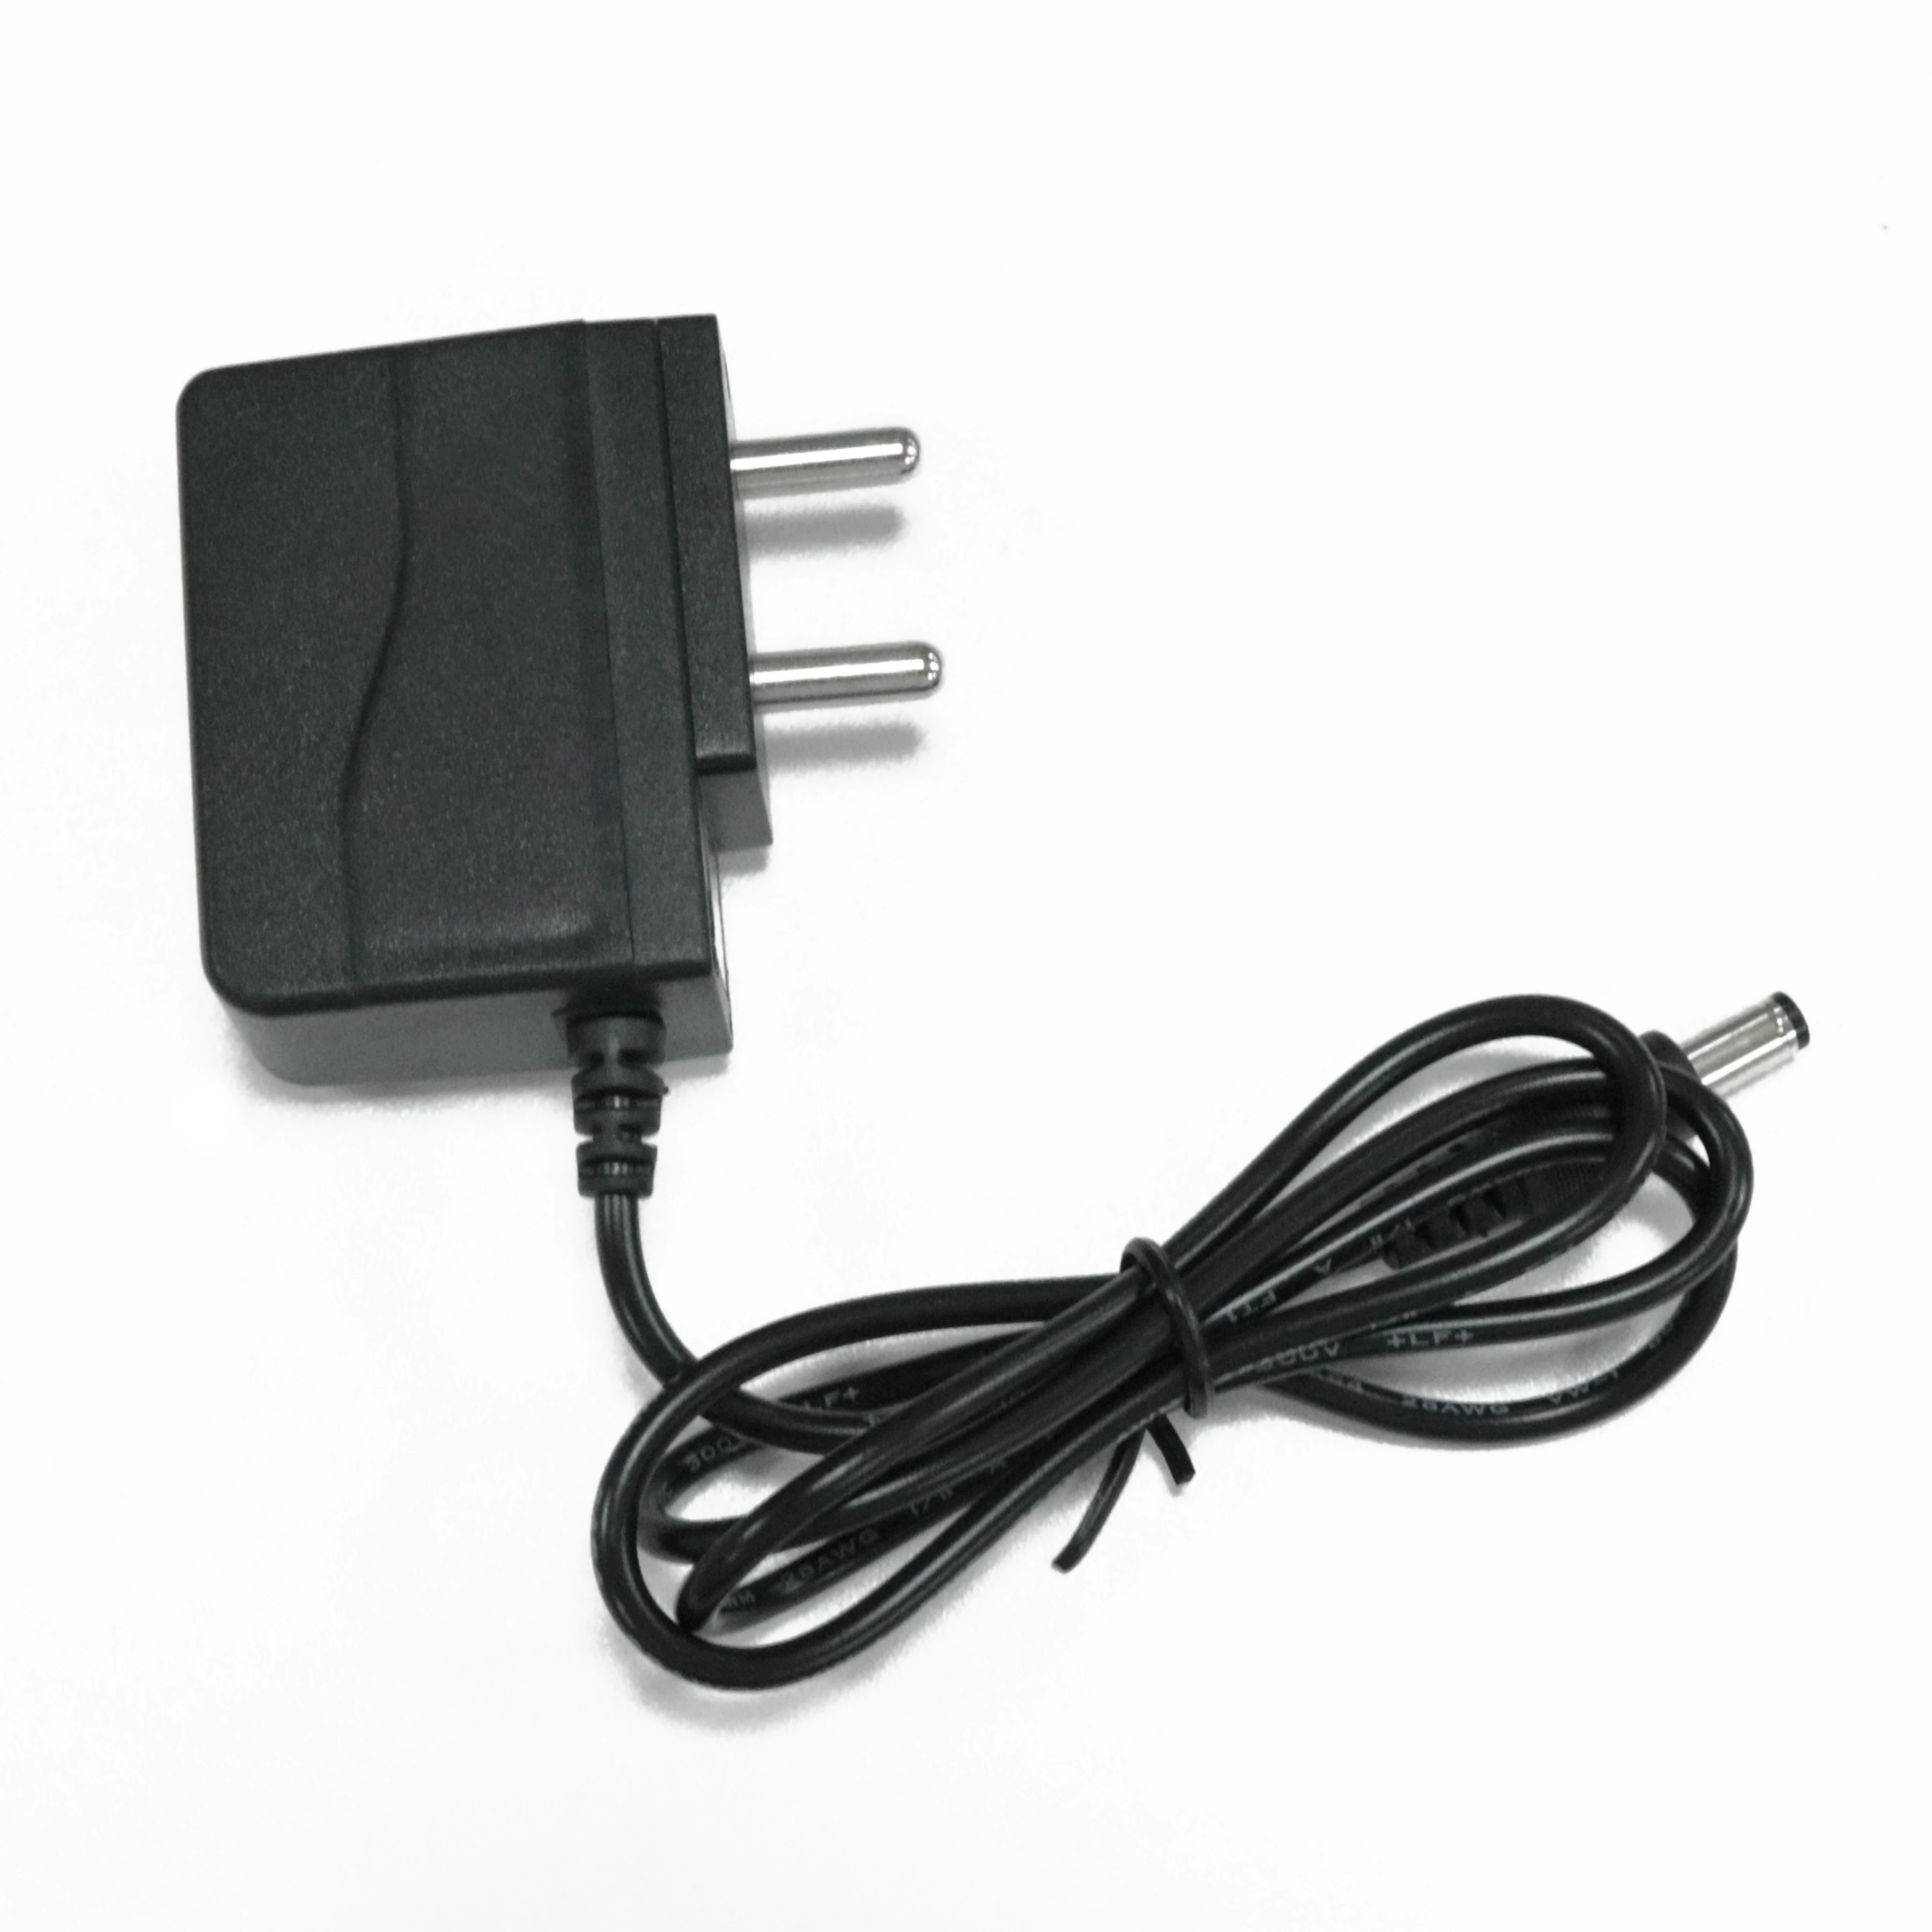 12V 0.5A Output India Plug DC Switching BIS certification Power Adapter for ONU